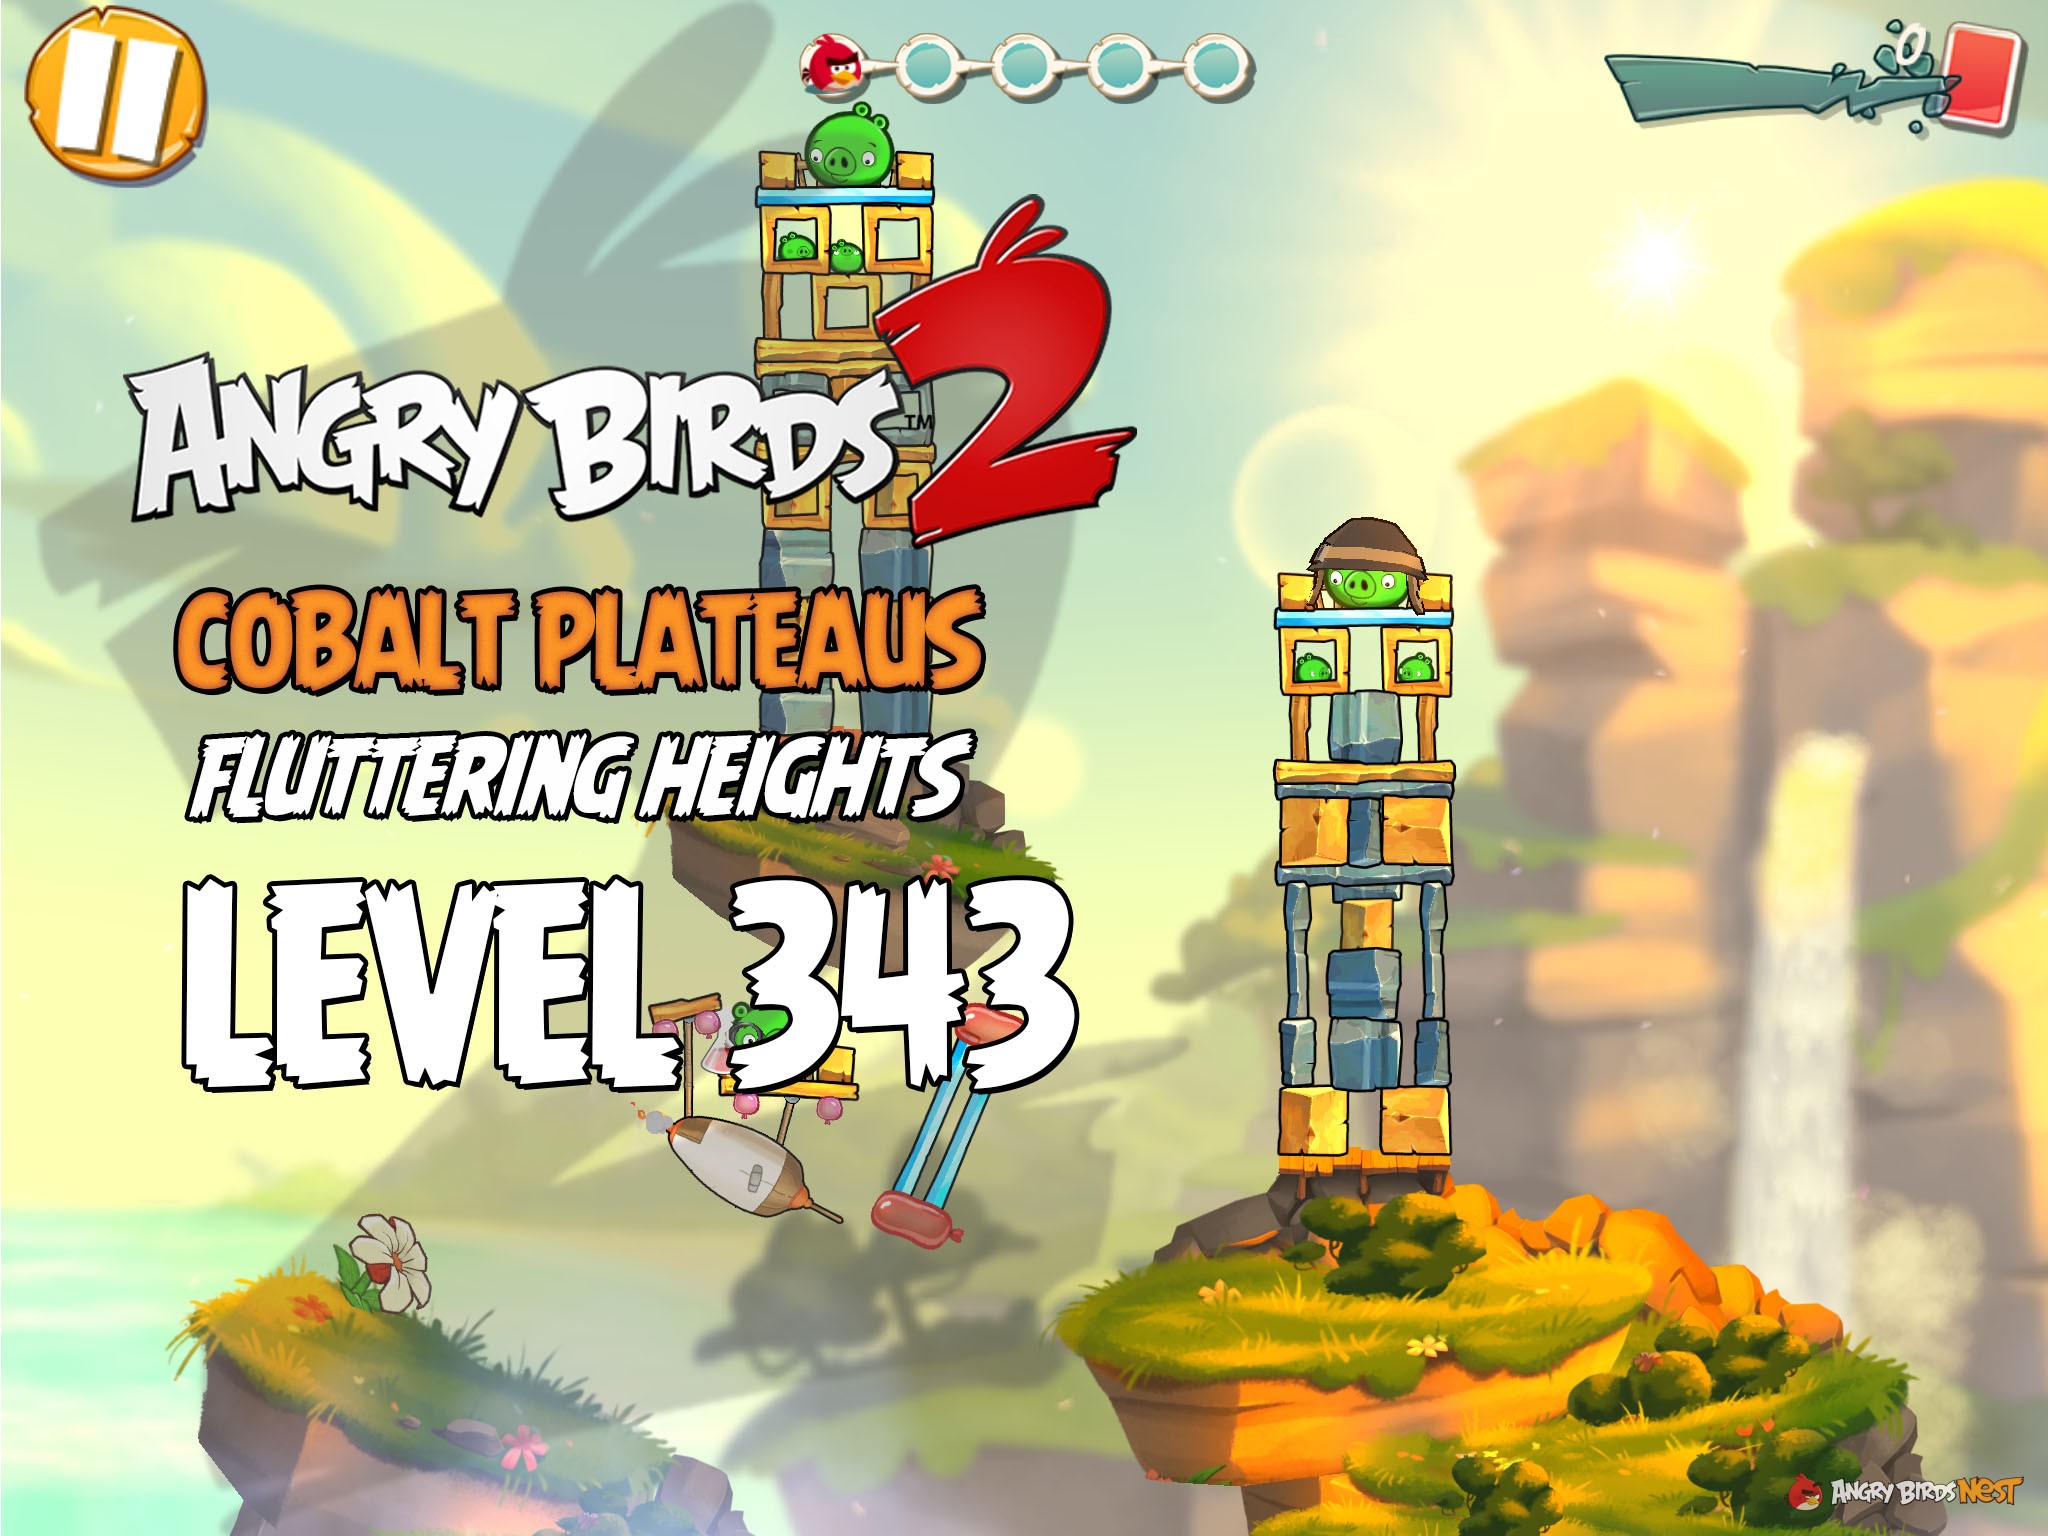 Angry Birds 2 Cobalt Plateaus Fluttering Heights Level 343